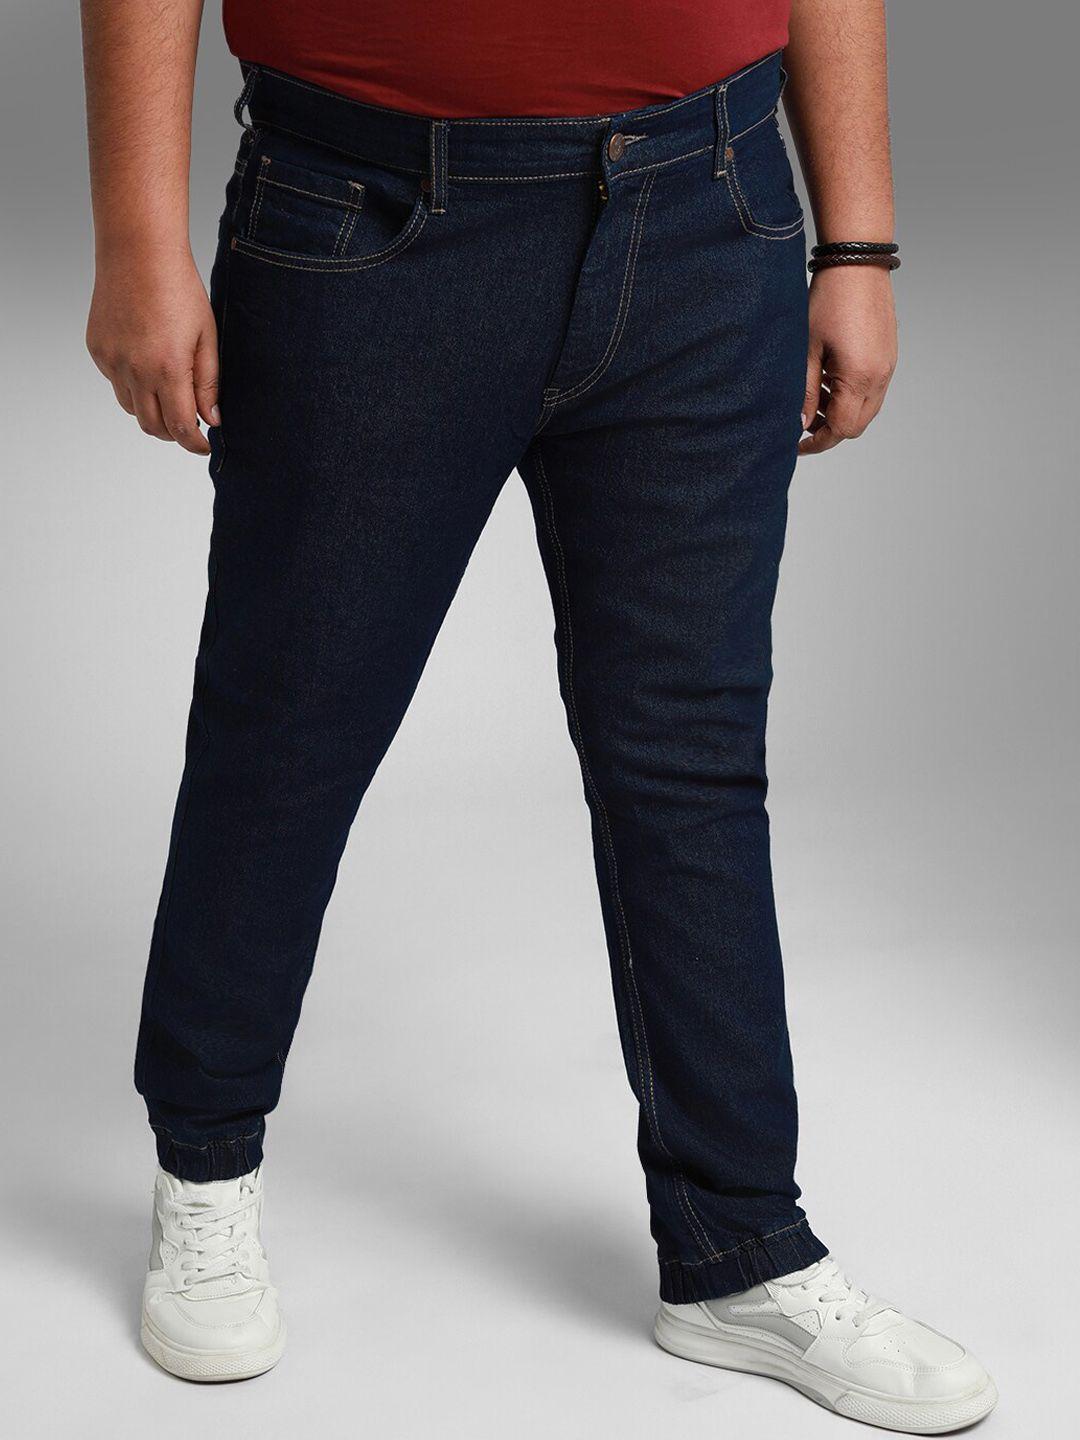 freeform by high star men plus size slim fit stretchable jeans